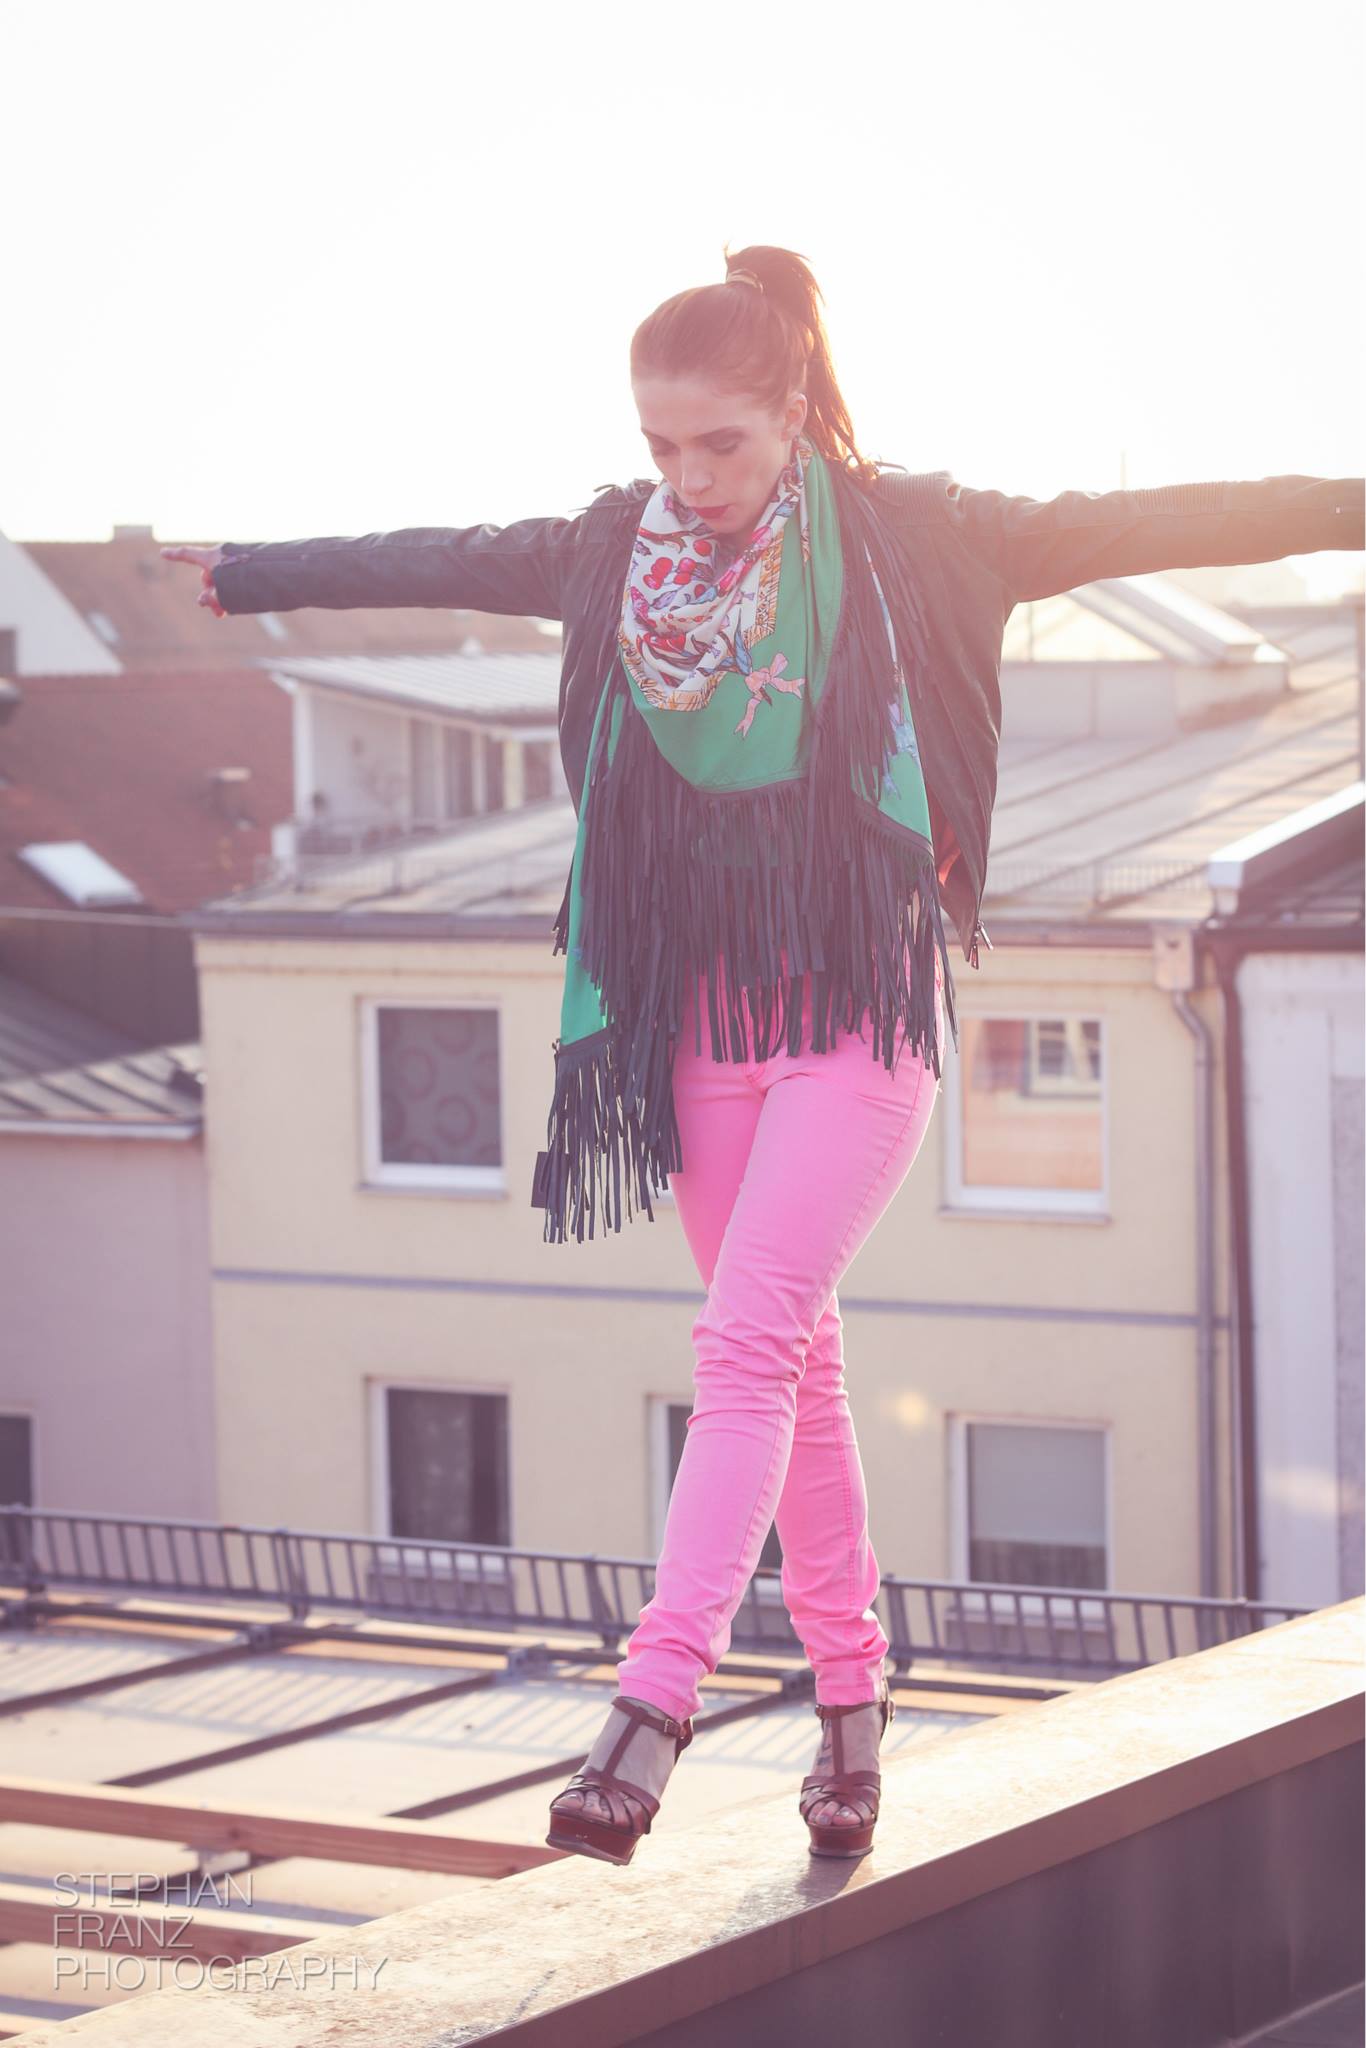 Yousefy Rooftoop Fashion Shooting 2014 - Stephan Franz Photography